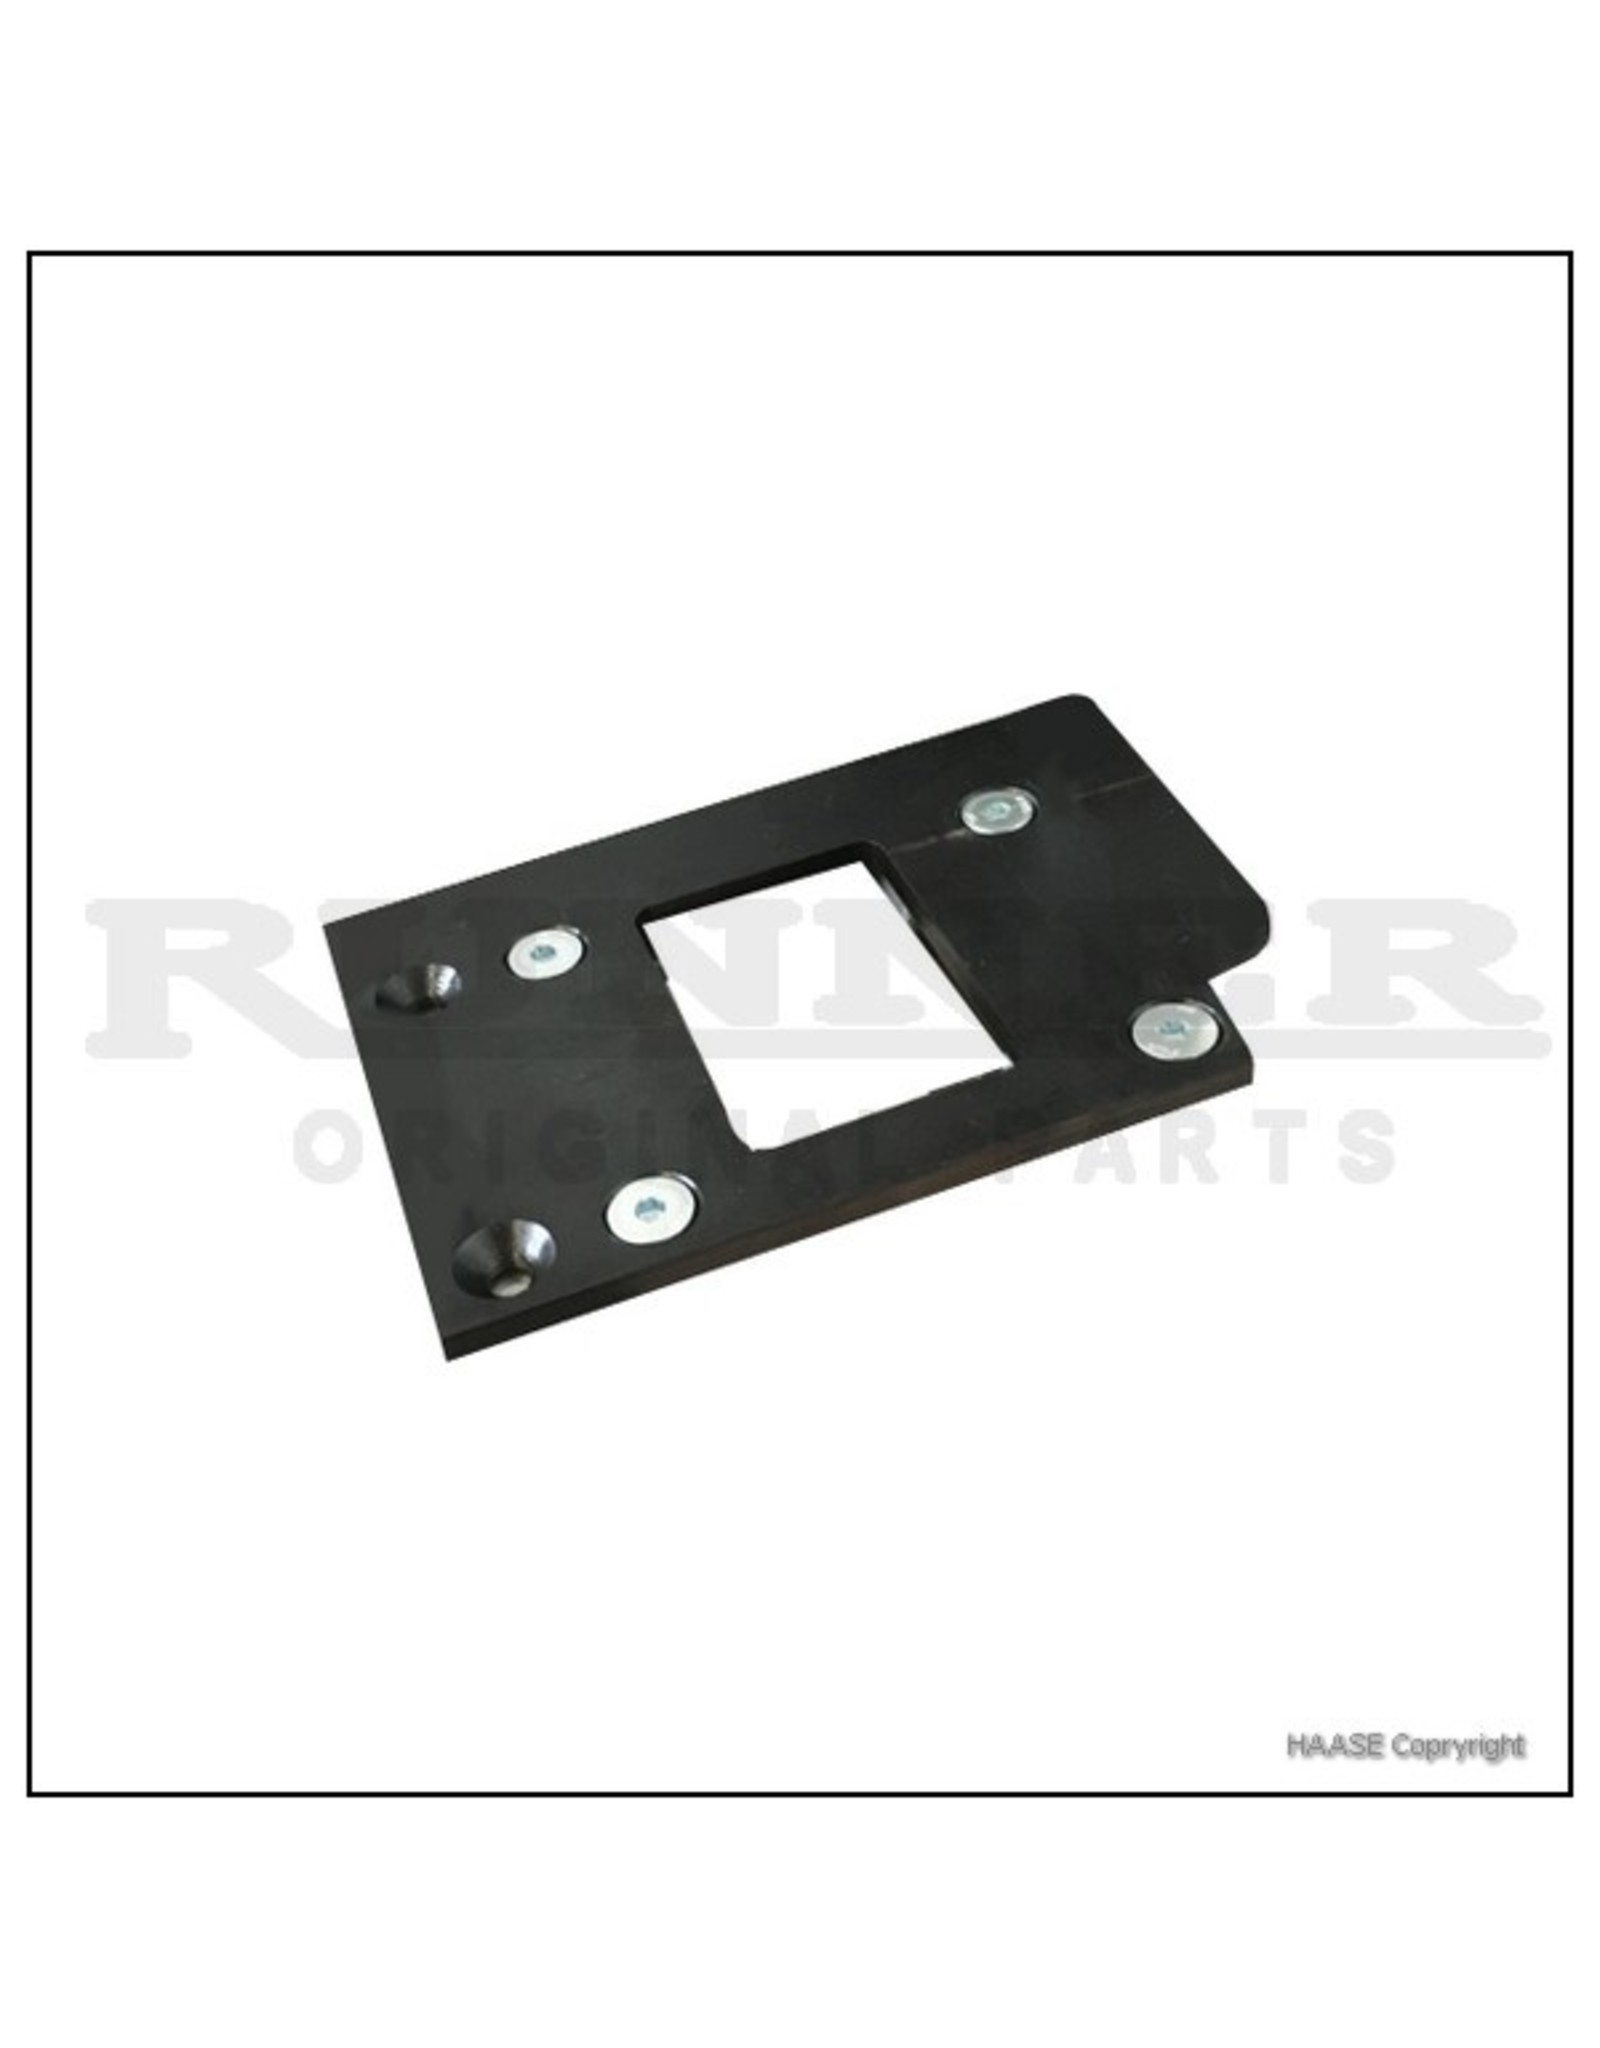 Haase Haase runner engine plate for Briggs and stratton engine